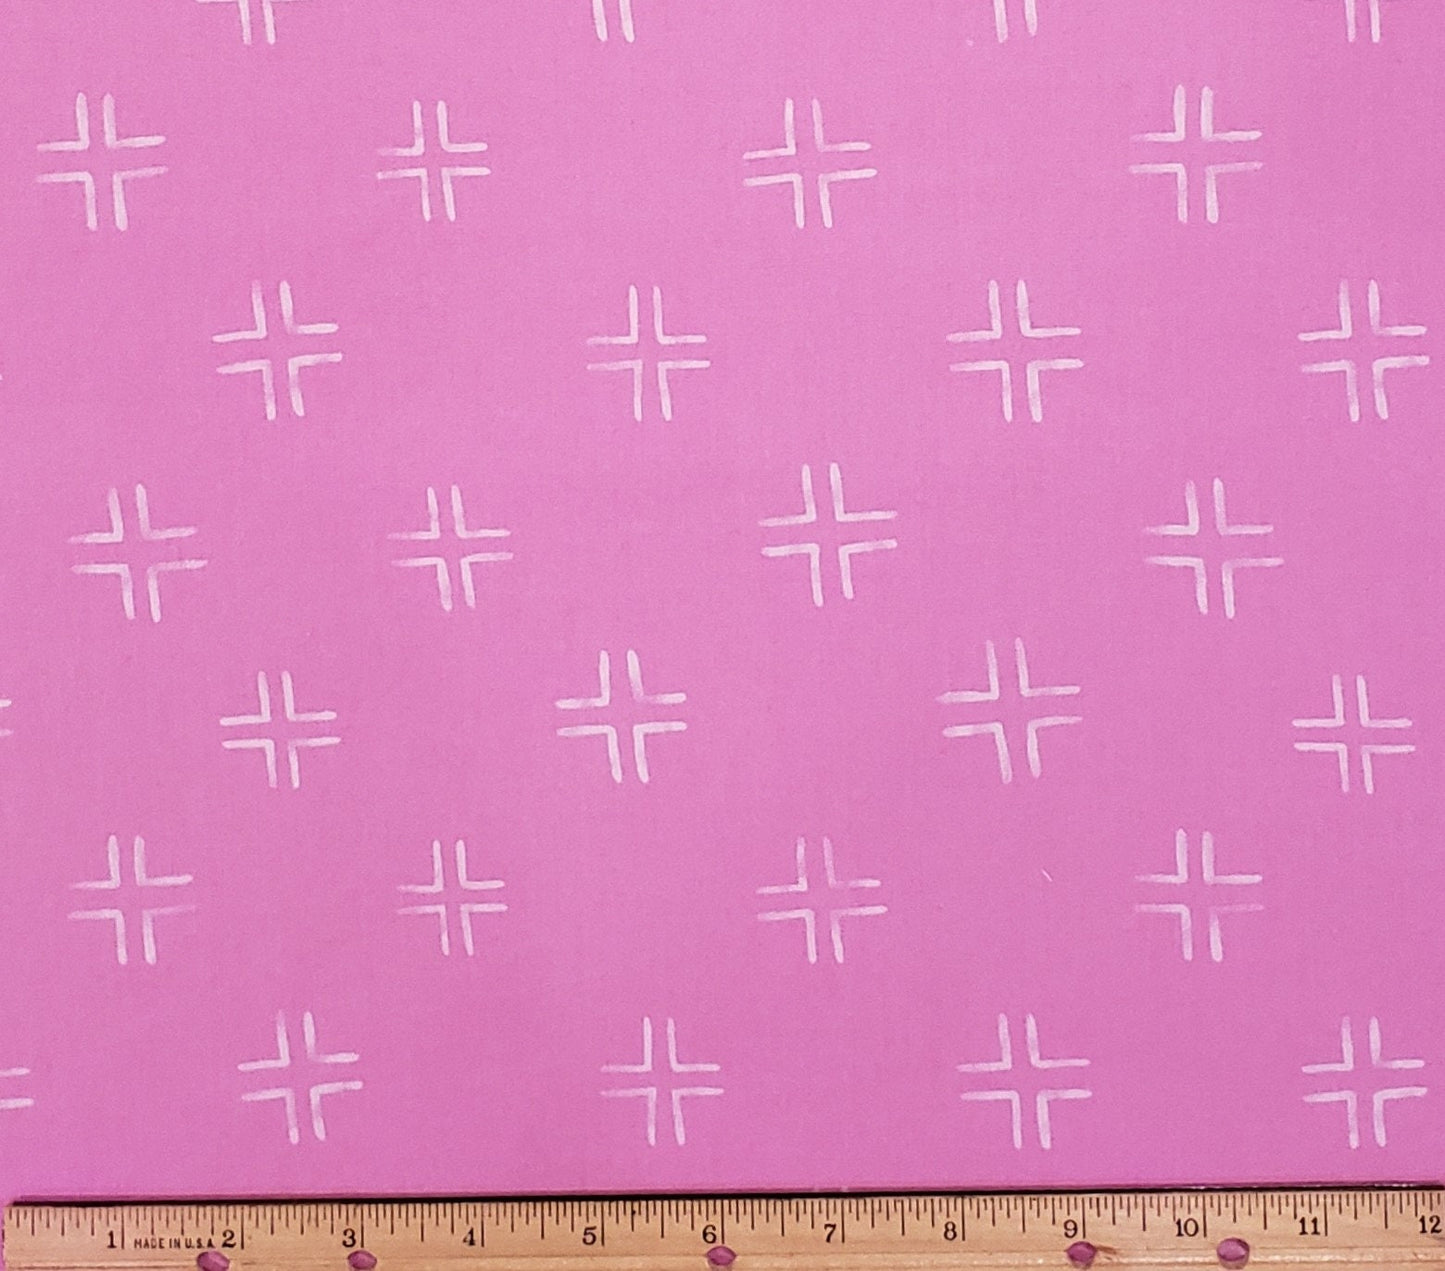 2016 #1544 Cloud9 Collective Brush Strokes by Holly Degroot Trellis - Pink Fabric / White Cross Pattern